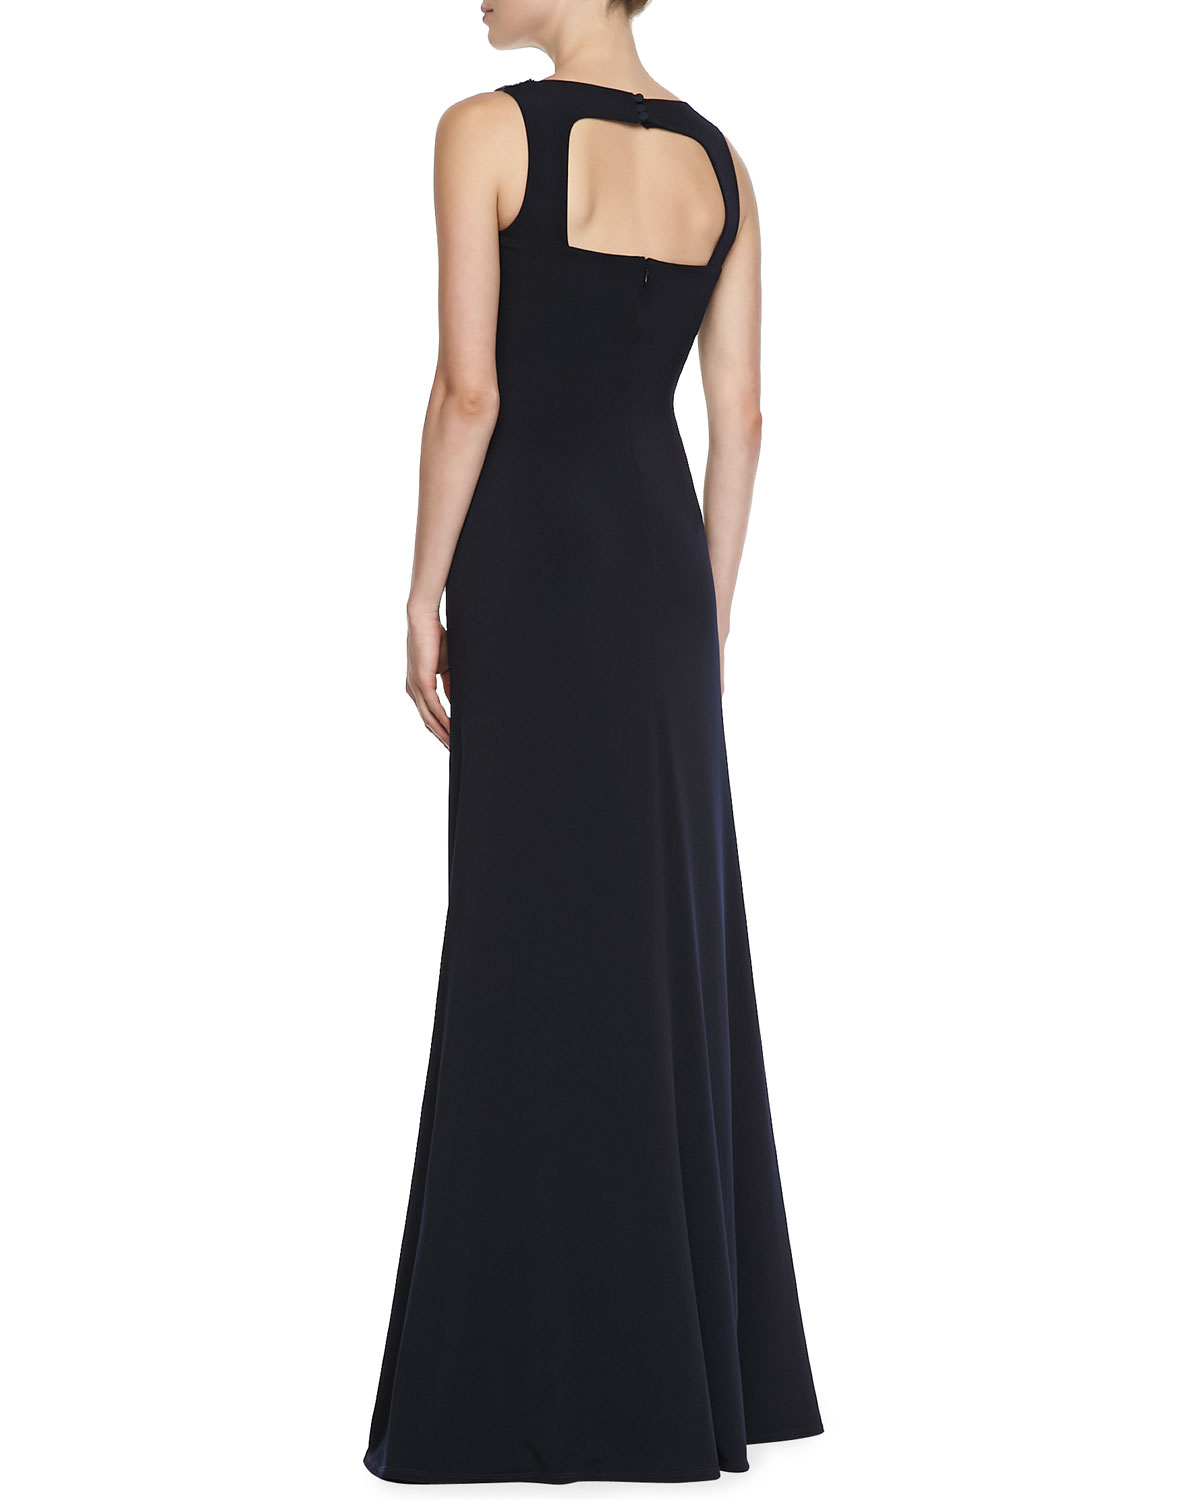 Lyst - David meister Sleeveless Jewelry Neck Gown in Black